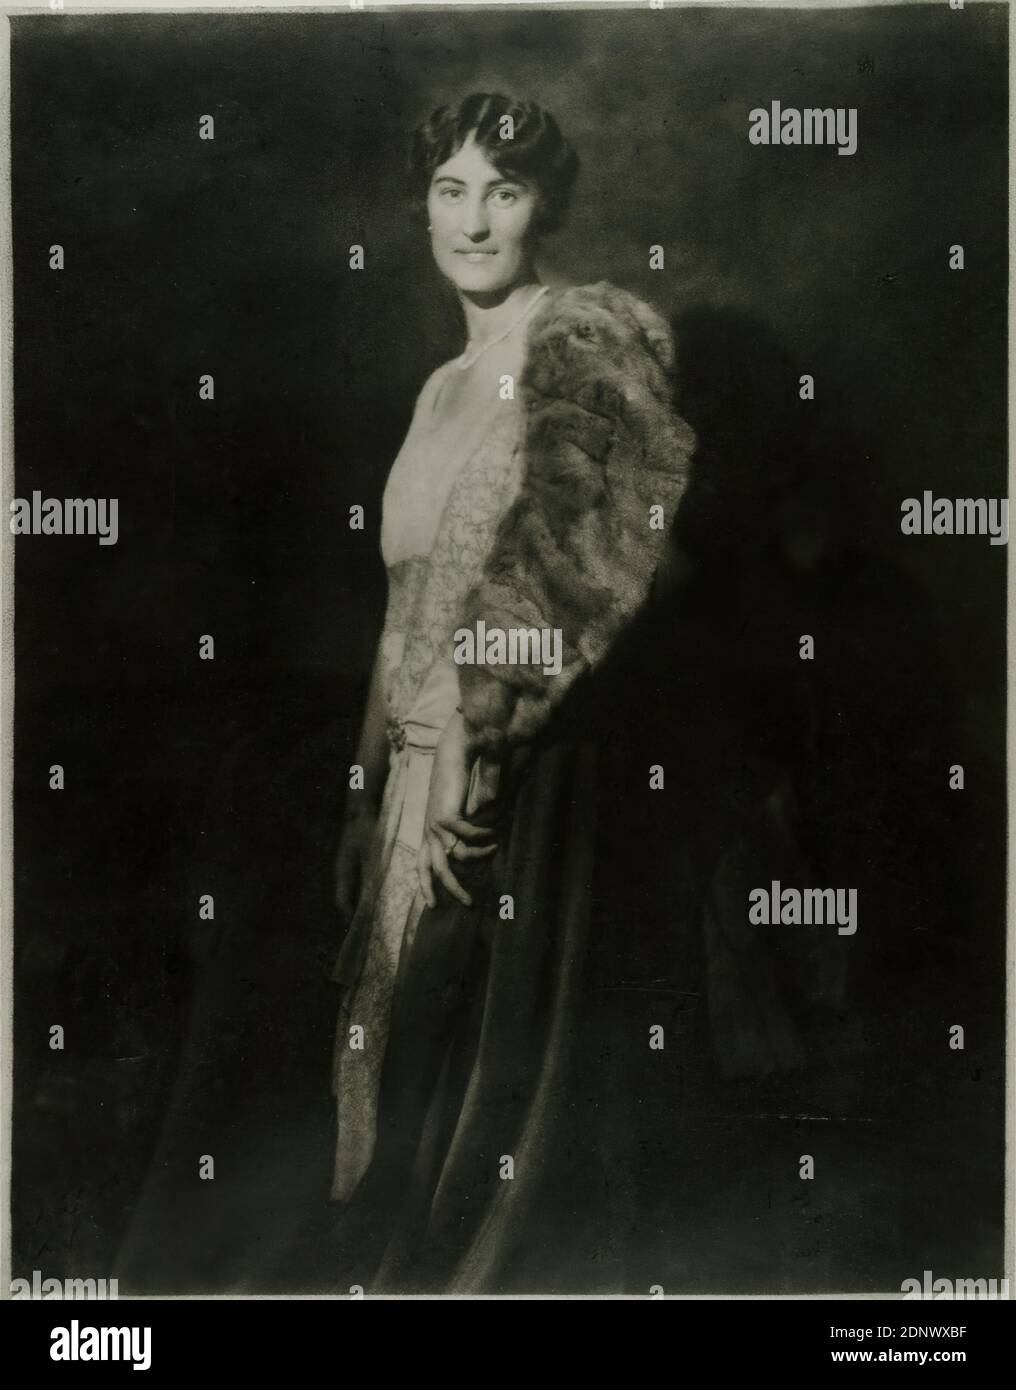 Franz Grainer, portrait of a woman, Staatliche Landesbildstelle Hamburg, collection on the history of photography, paper, bromoil print, image size: height: 44,5 cm; width: 34,3 cm, signed: recto u. re. in lead: Grainer, stamp: verso and left: stamp and object inscription of the Staatliche Landesbildstelle Hamburg, portrait photography, full-length portrait, en face (frontal view), fashion, clothing, woman, portrait, jacket, coat, cape Stock Photo